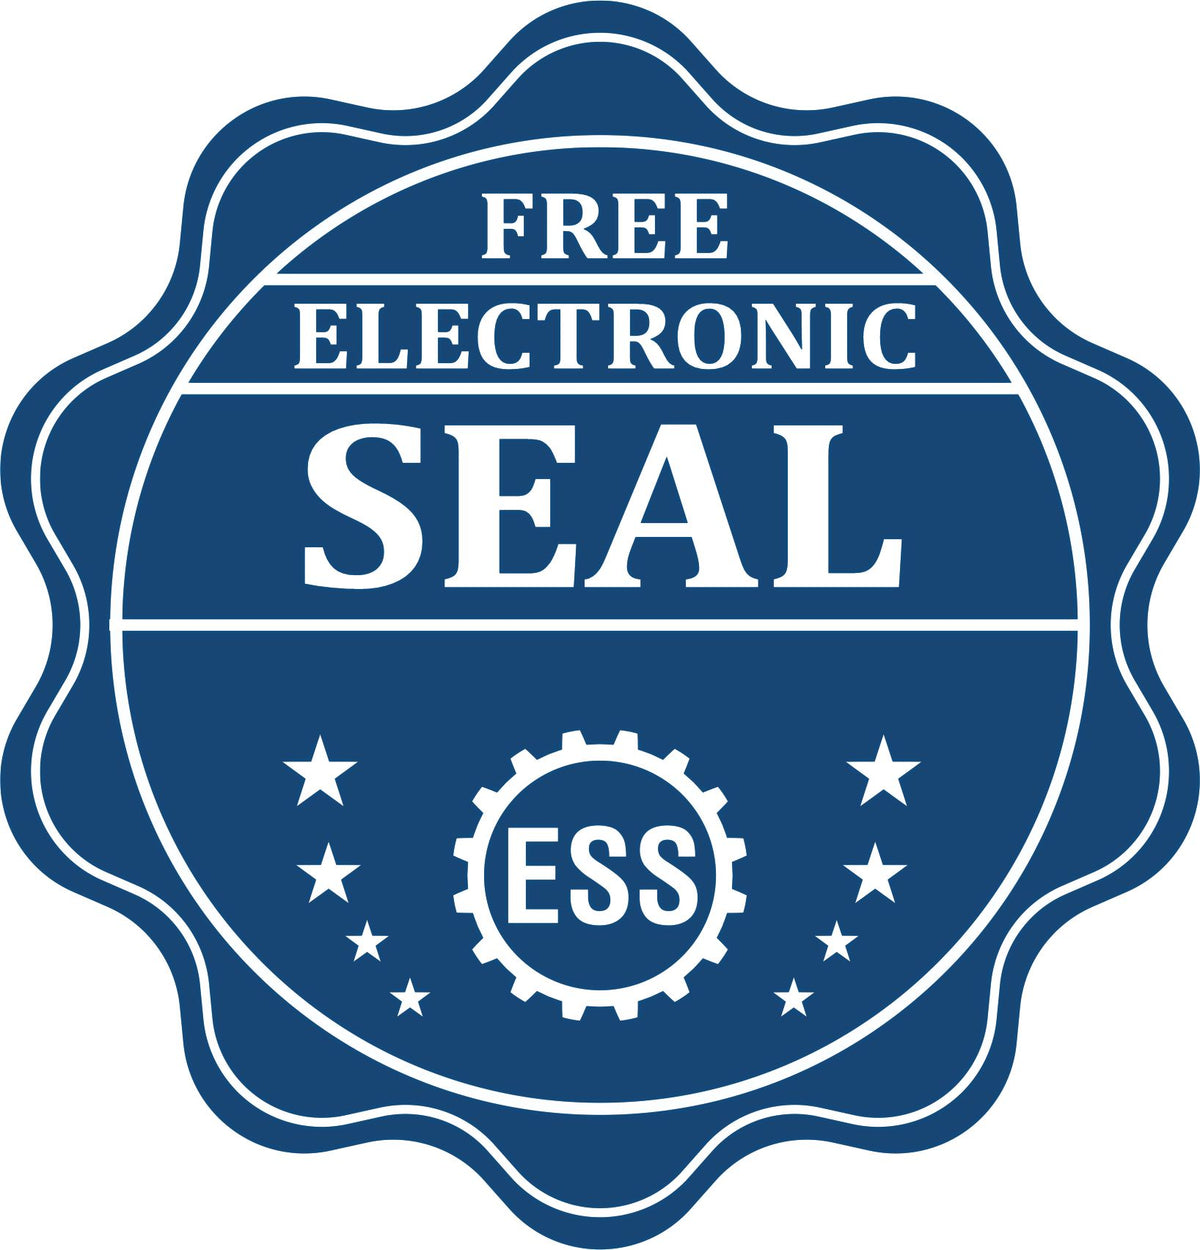 A badge showing a free electronic seal for the Soft Pocket New York Landscape Architect Embosser with stars and the ESS gear on the emblem.